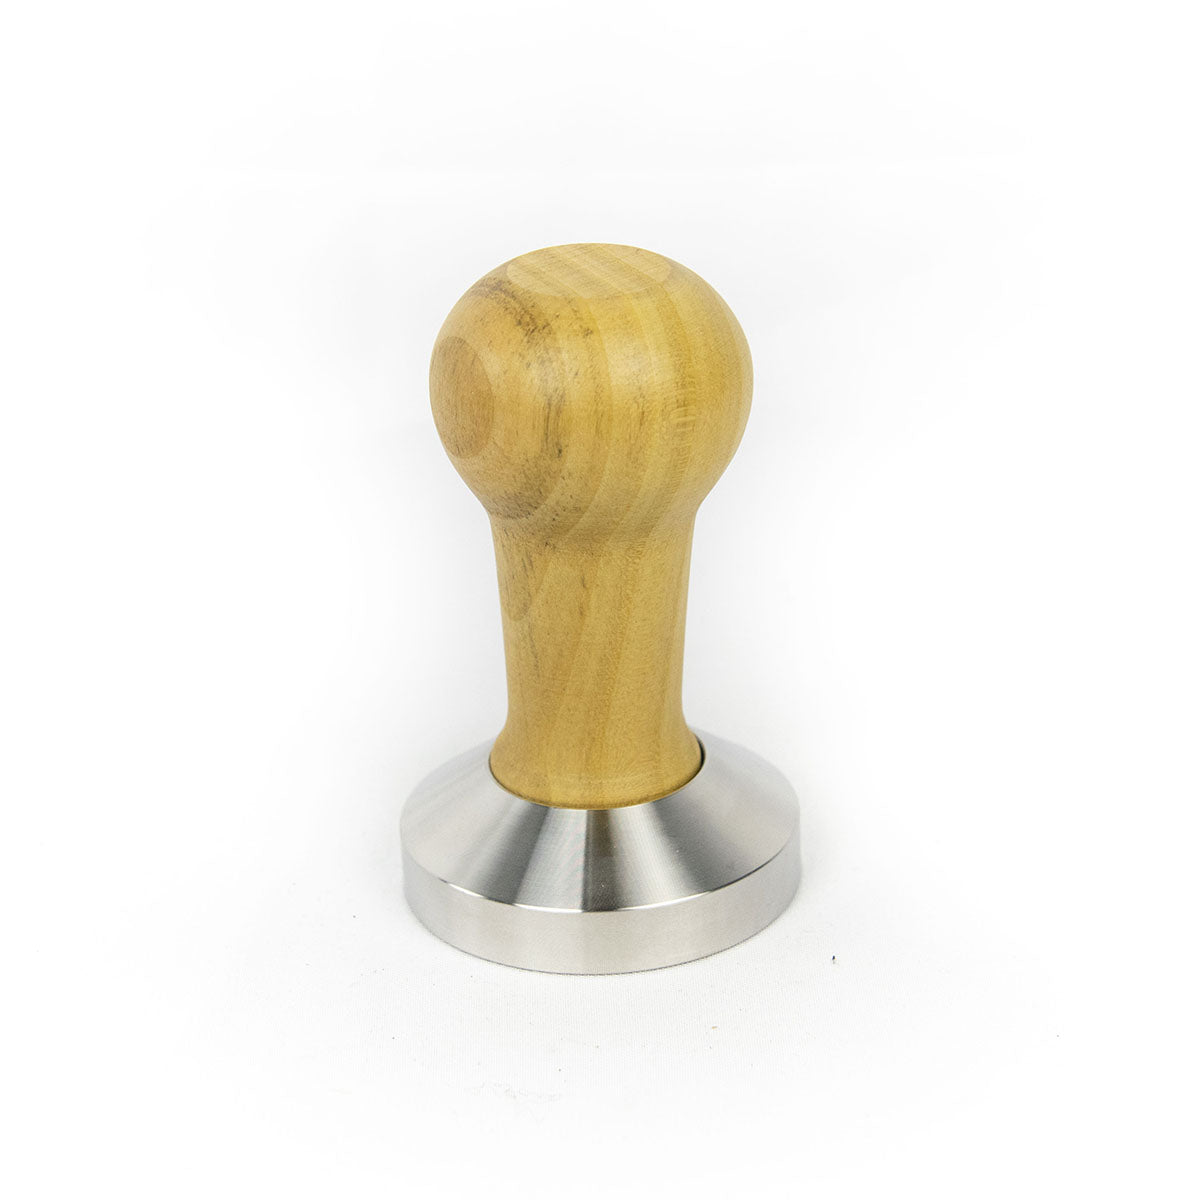 IMS PRECISION TAMPERS